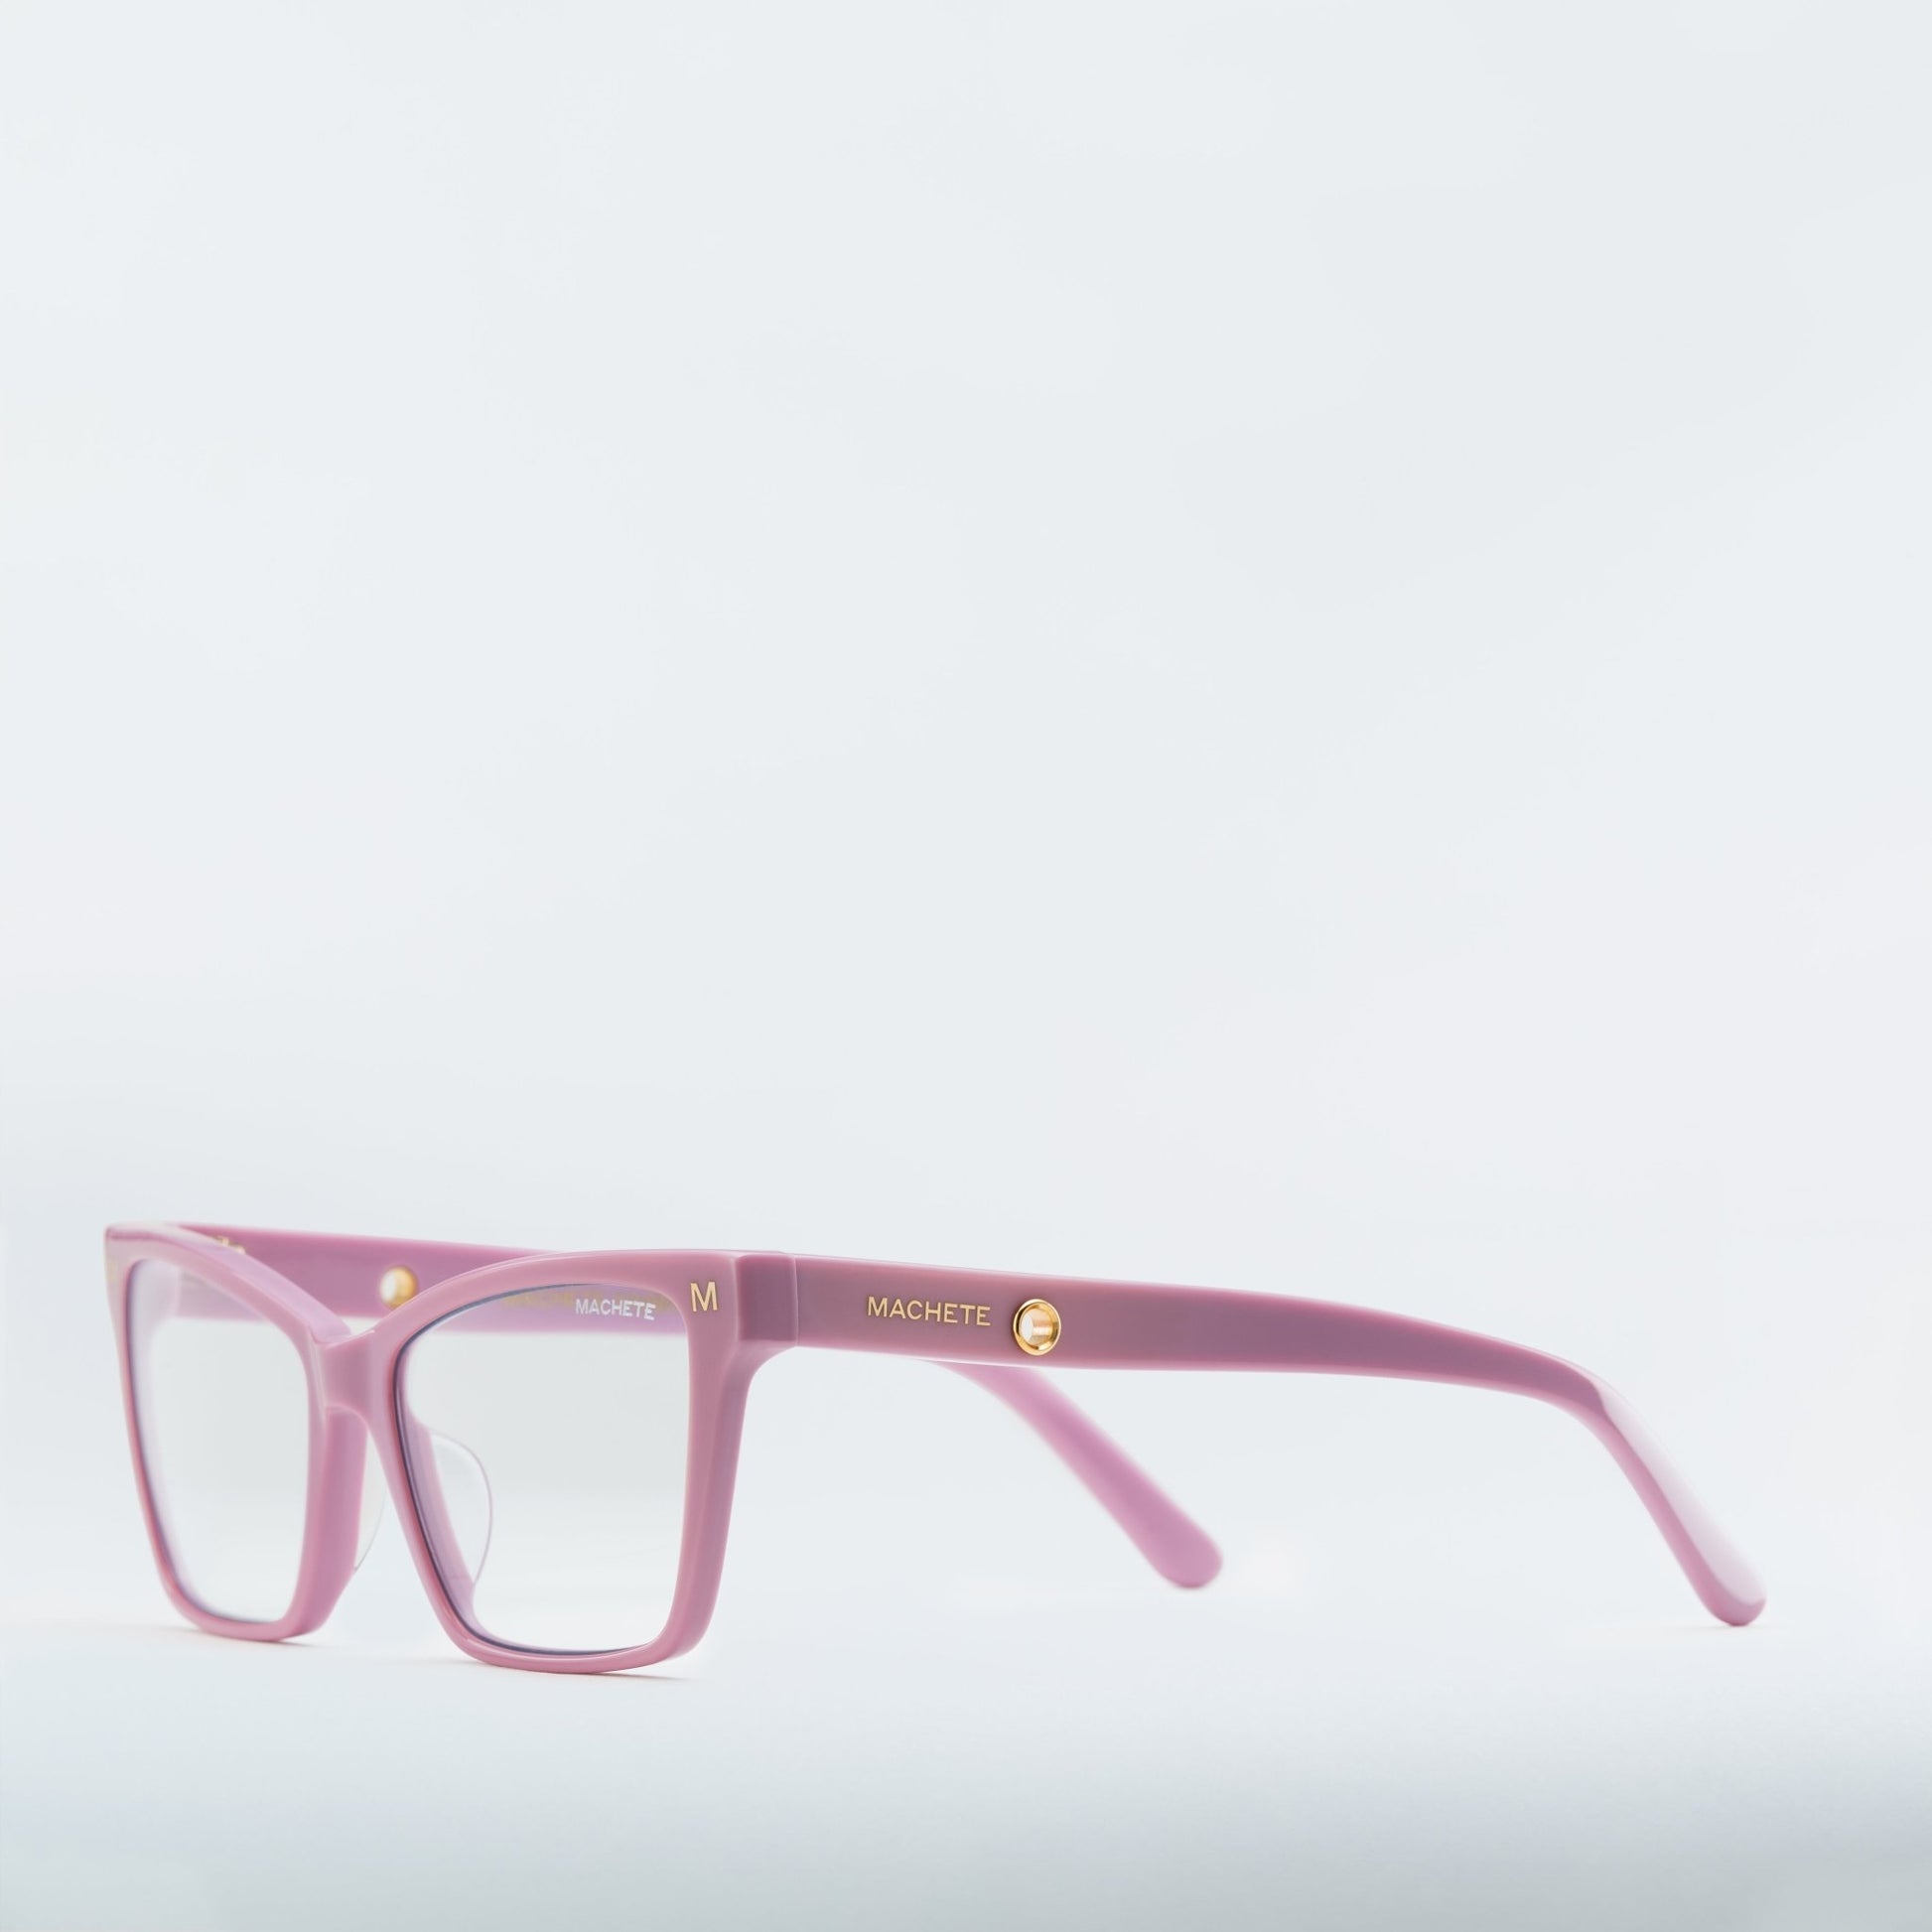 Sally Blue Light Filtering Glasses in Orchid